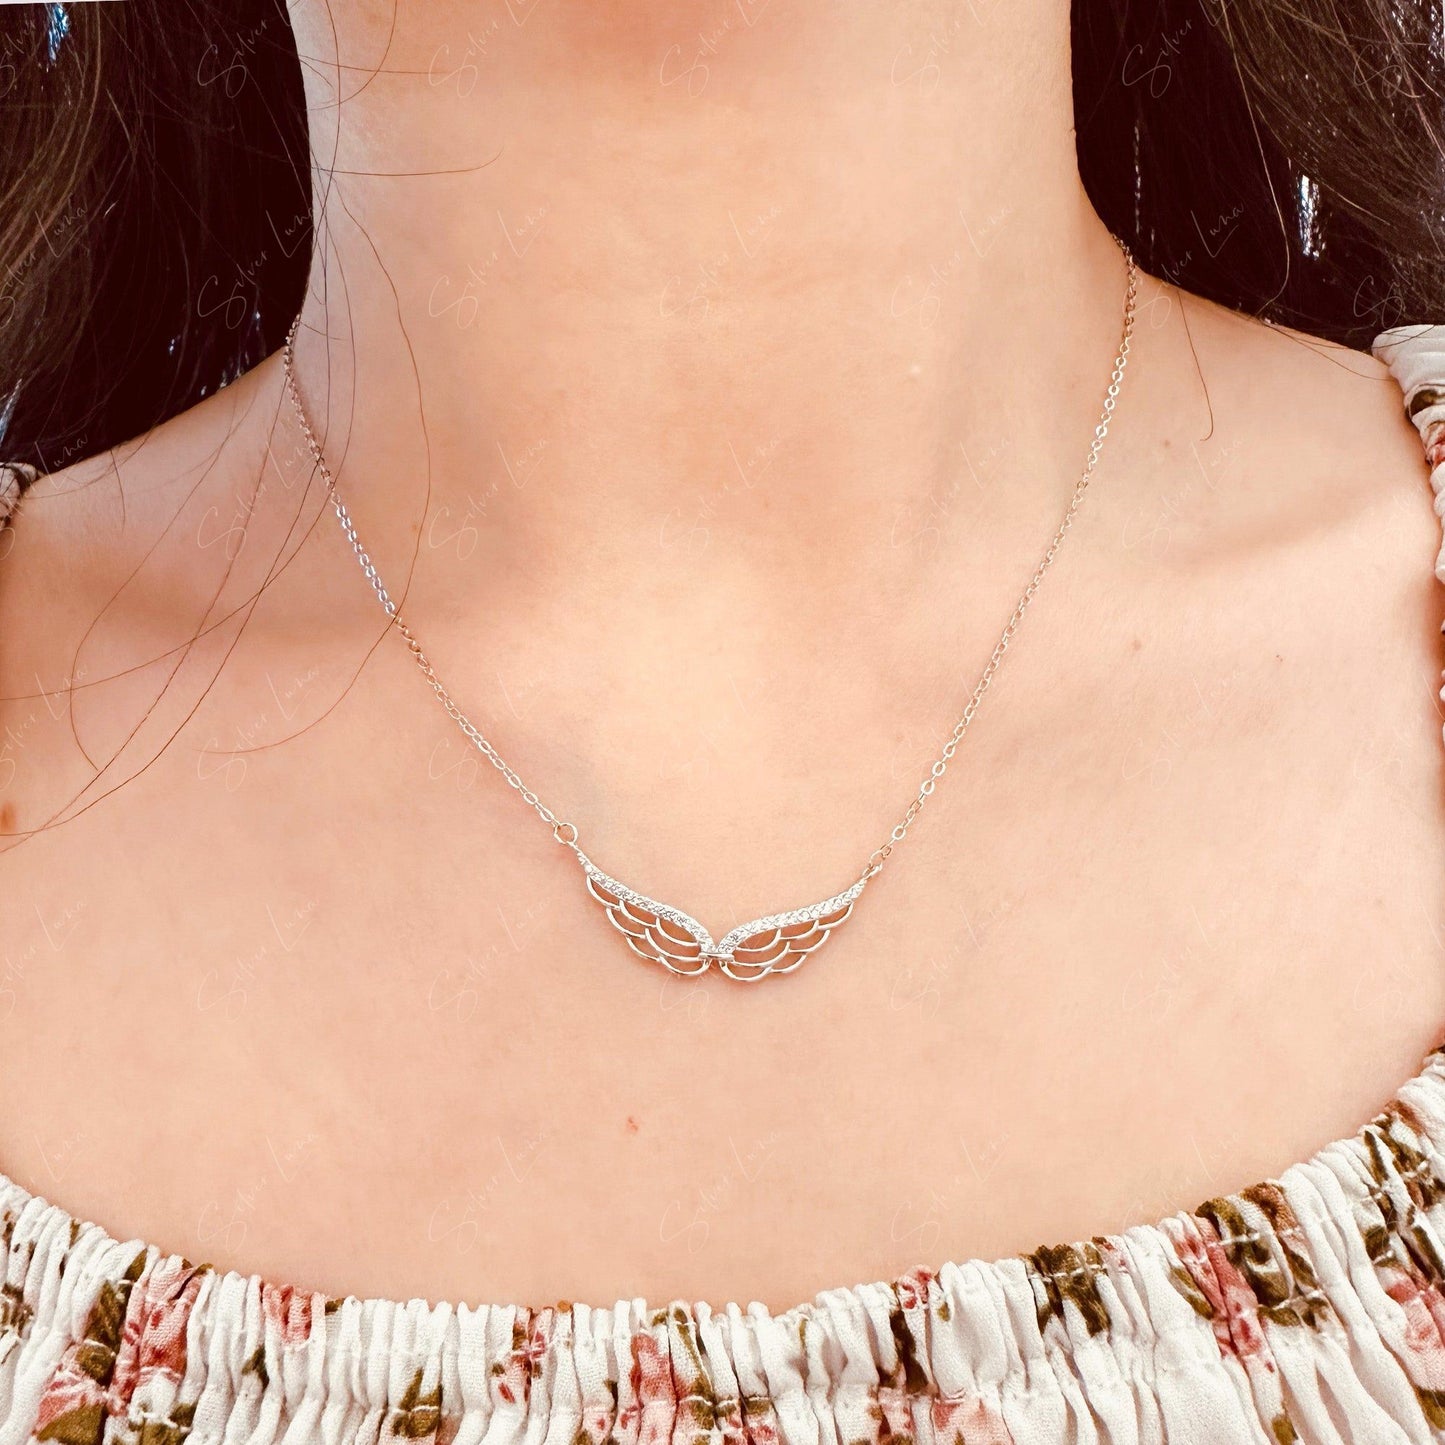 Dainty angle wing pendant necklace